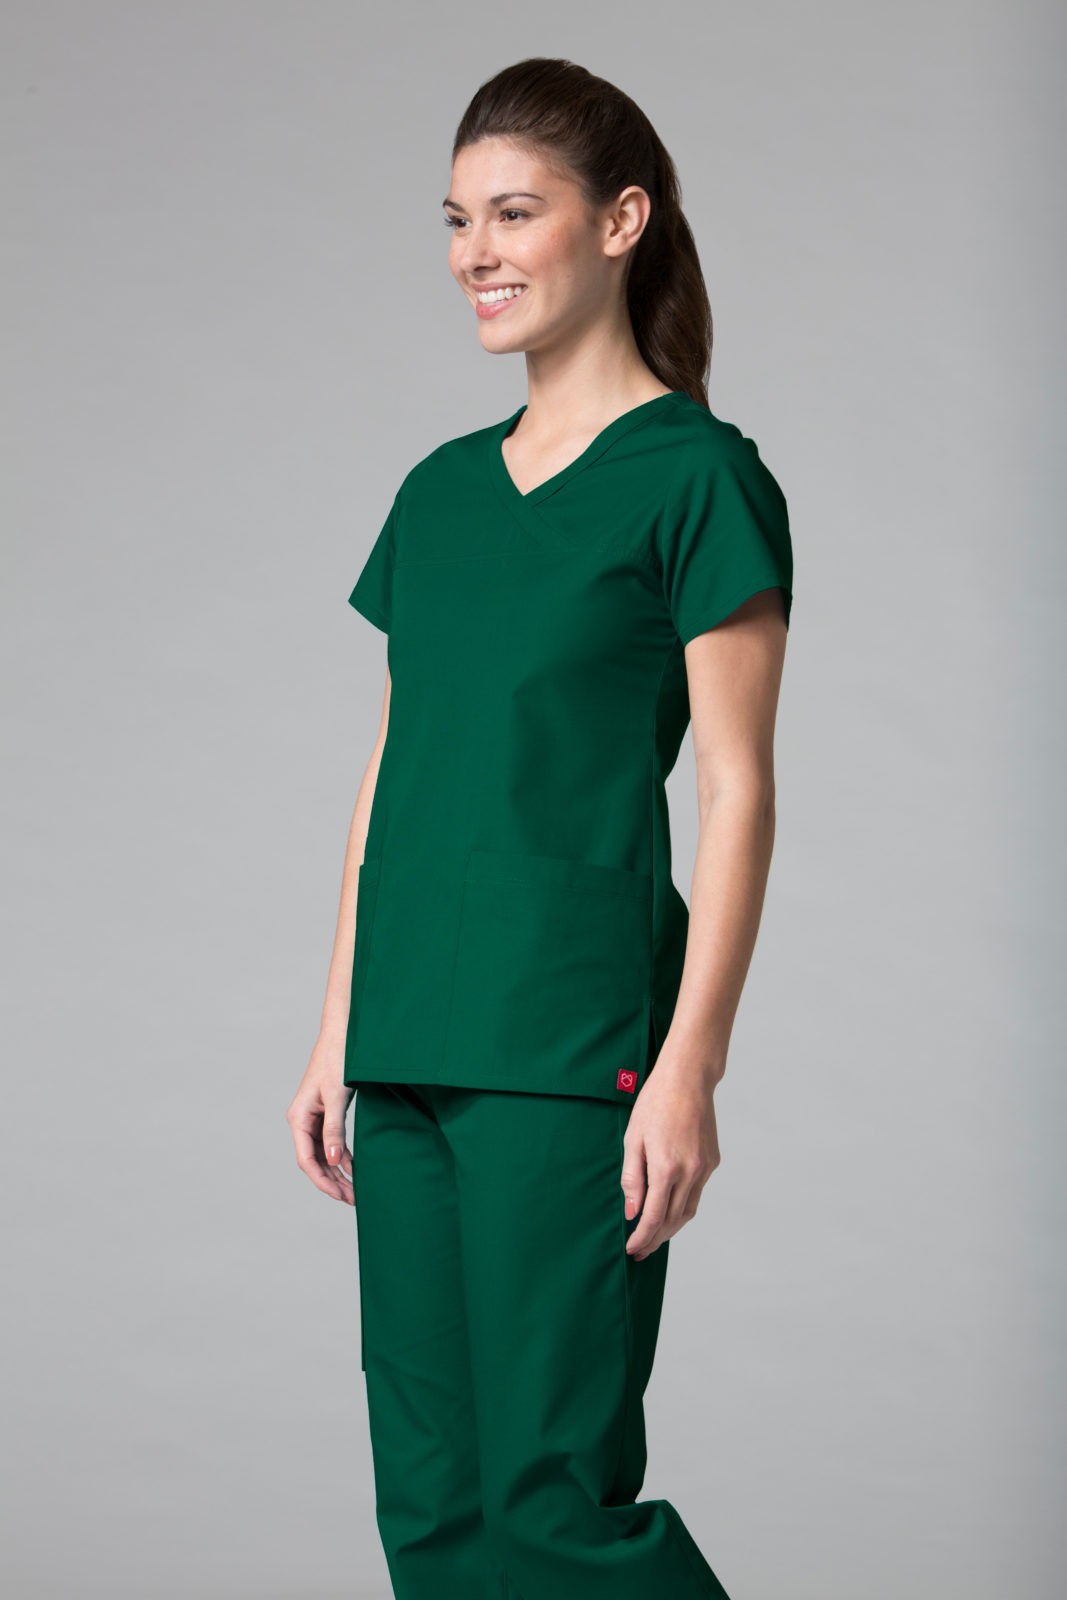 Red Panda 1726 - Curved Mock Wrap Top - Henry Ford Health Uniform Apparel